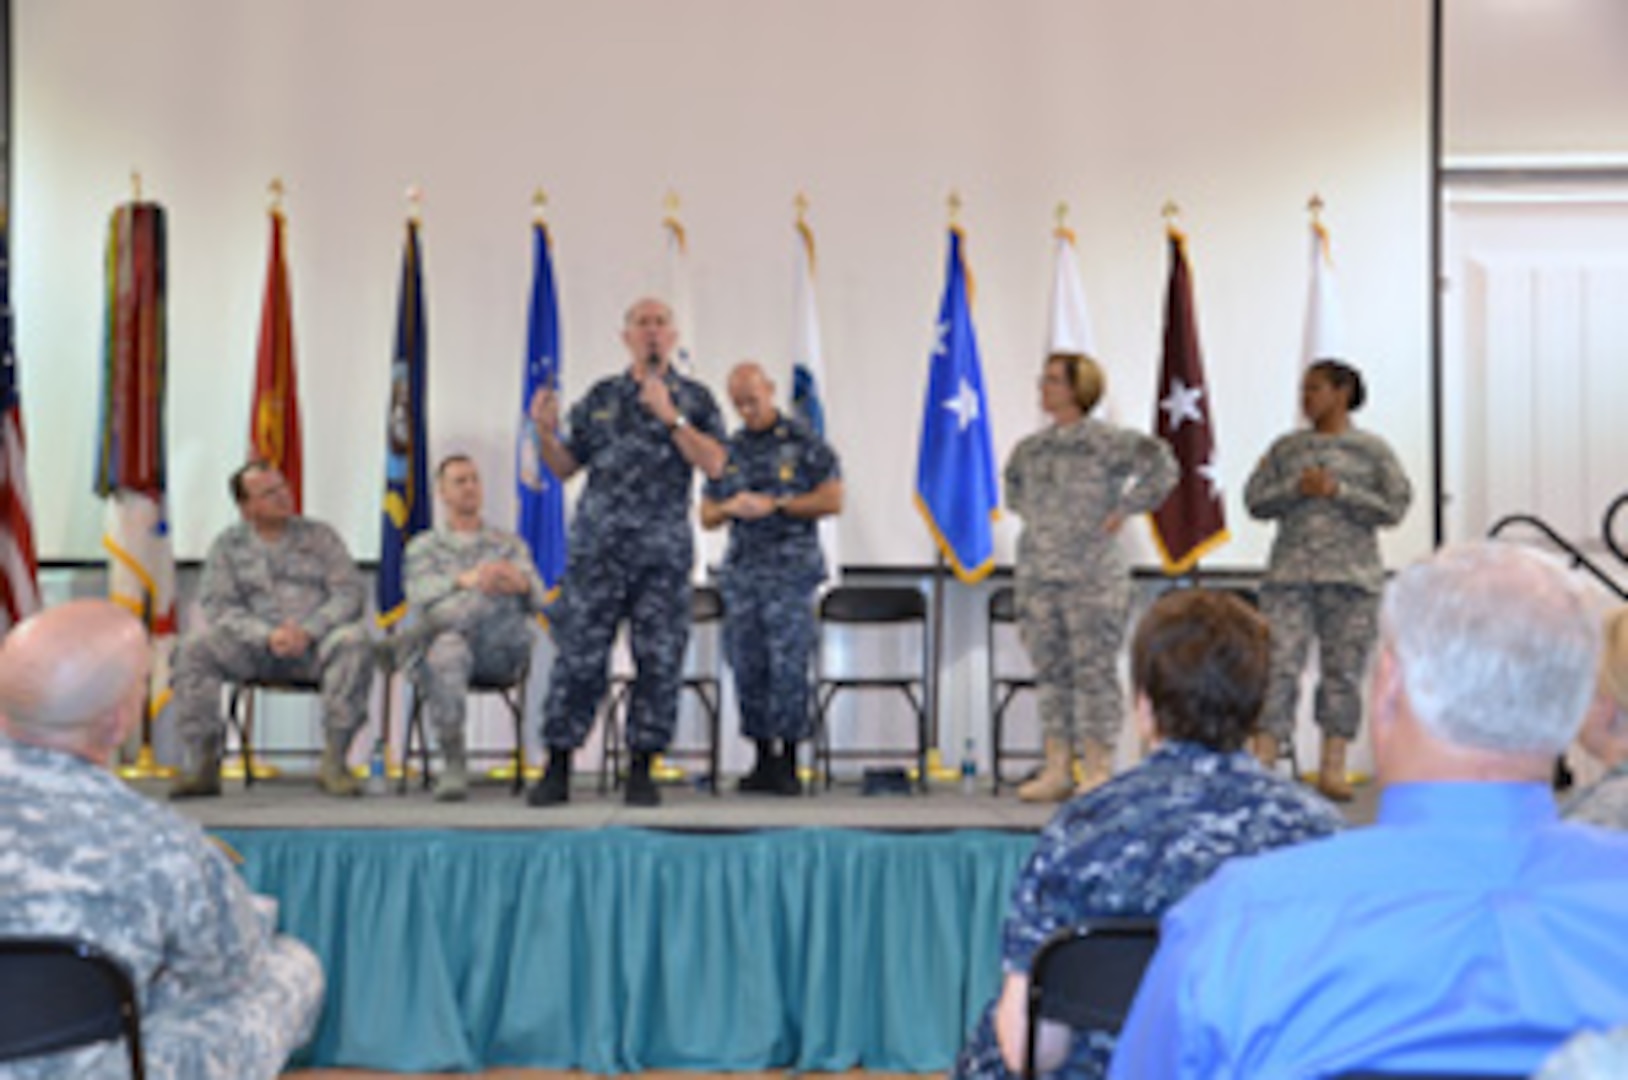 (May 30, 2012) Instructors and staff of the Medical Education & Training Campus (METC) were given the opportunity of a lifetime when Lt. Gen. Charles Green, surgeon general of the Air Force; Vice Adm. Matthew Nathan, surgeon general of the Navy and chief, Bureau of Medicine and Surgery; and Lt. Gen. Patricia Horoho, surgeon general and commanding general, U.S. Army Medical Command and their senior enlisted leaders conducted All Hands calls during a visit to METC on May 30. 

(U.S. Navy photo by Lisa Braun/Released)